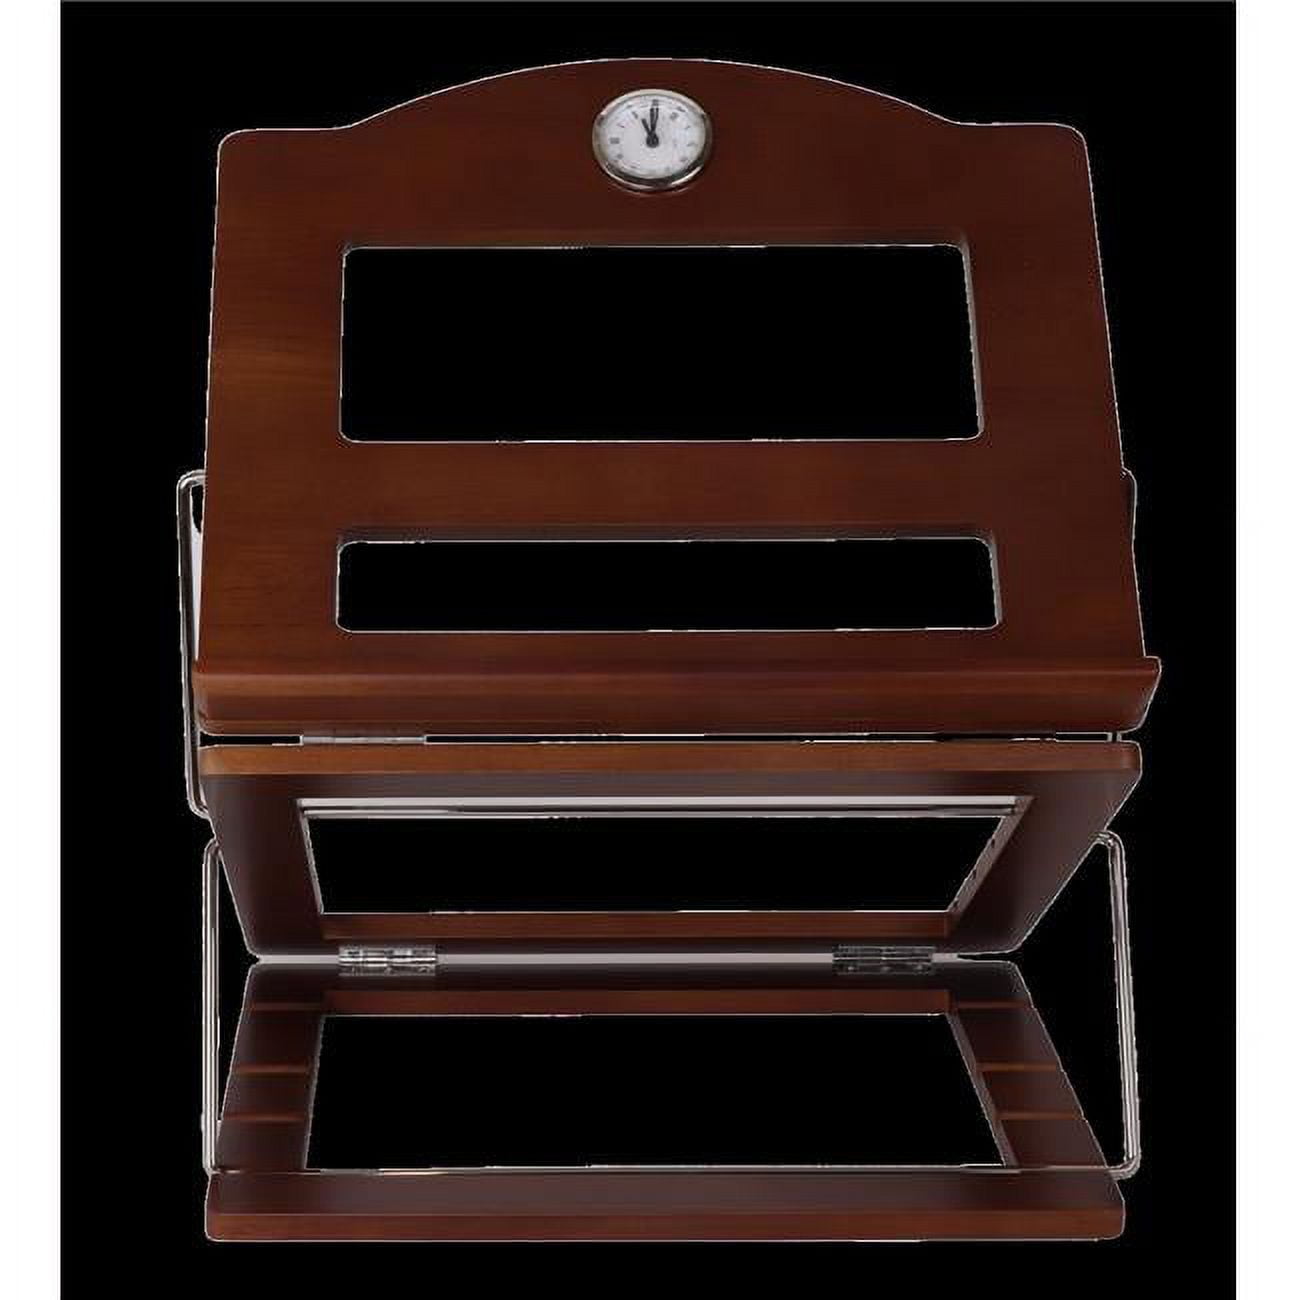 Picture of Nua 59972 Oak Wood Table Top Shtender with Clock - Adjustable Height